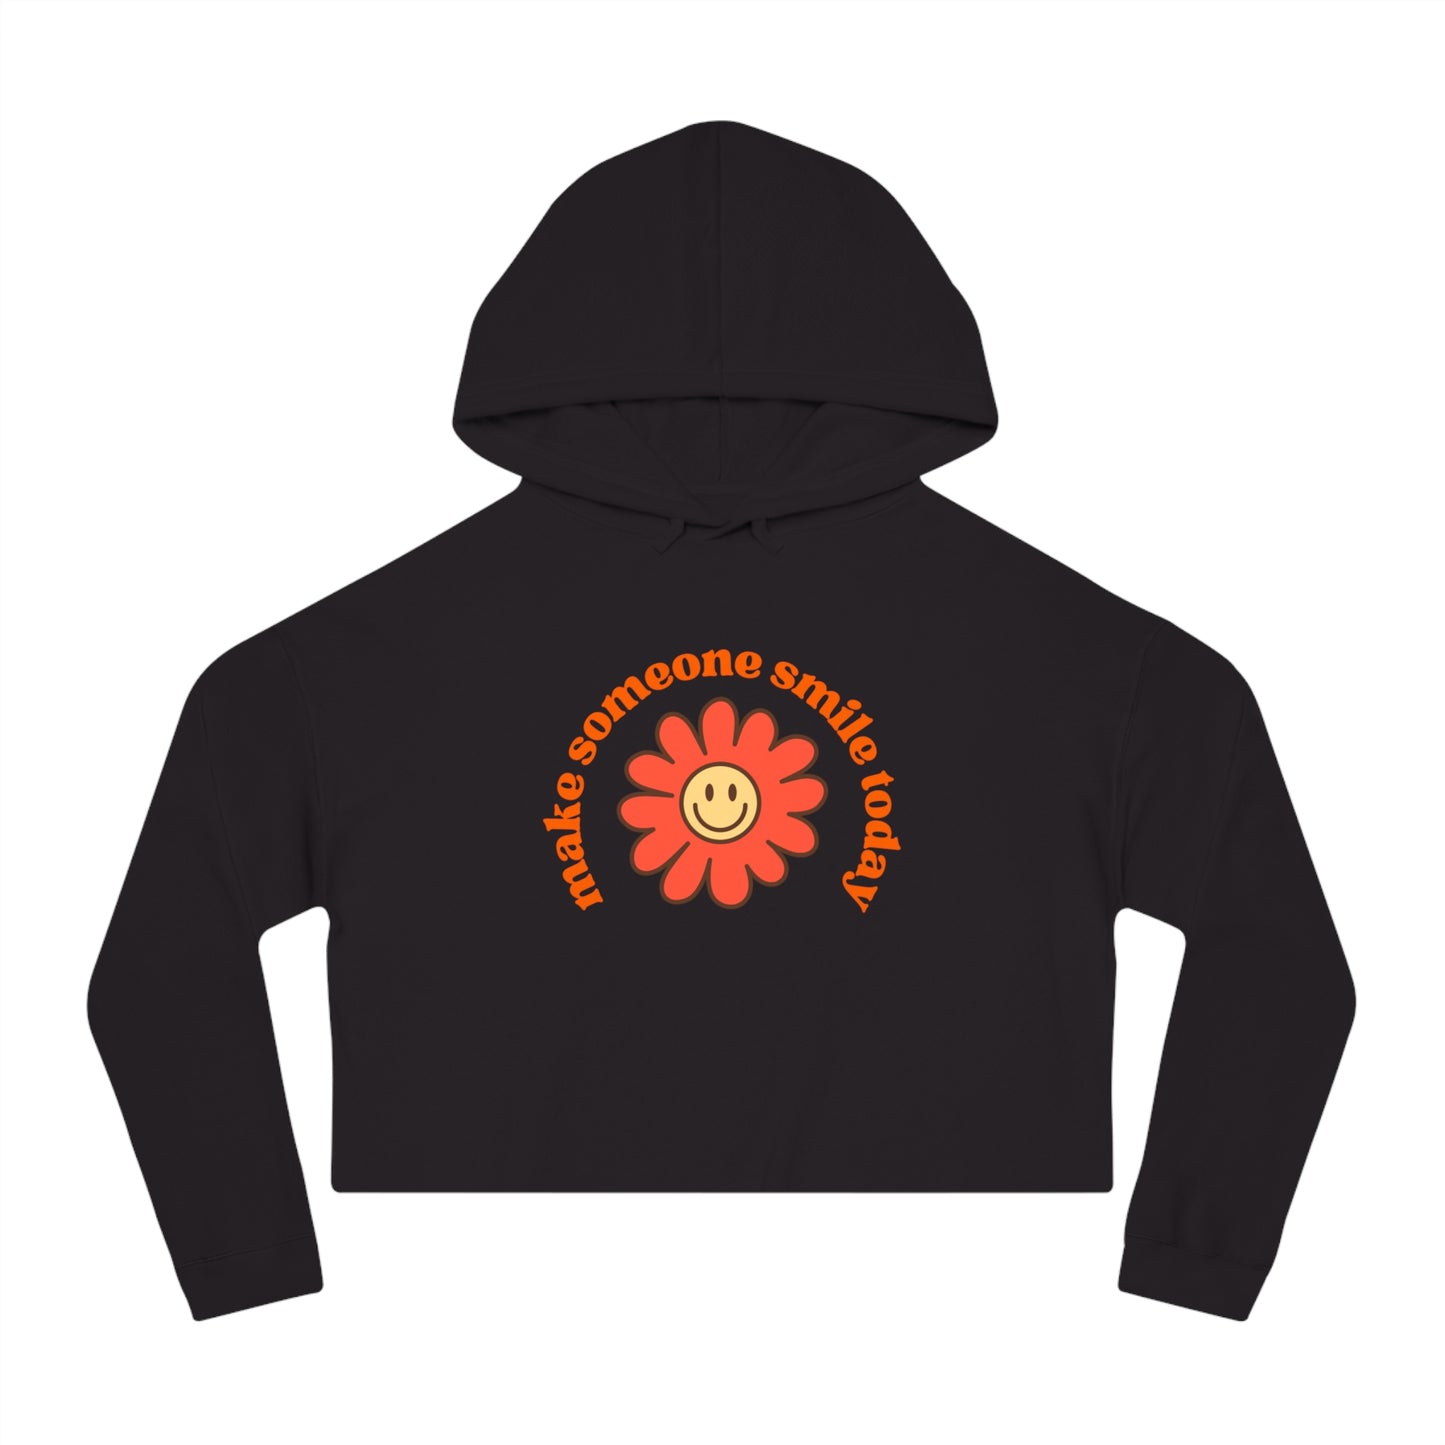 Bright flower under “make someone smile today" message design on this stylish Women’s Cropped Hooded Sweatshirt for your enjoyment.